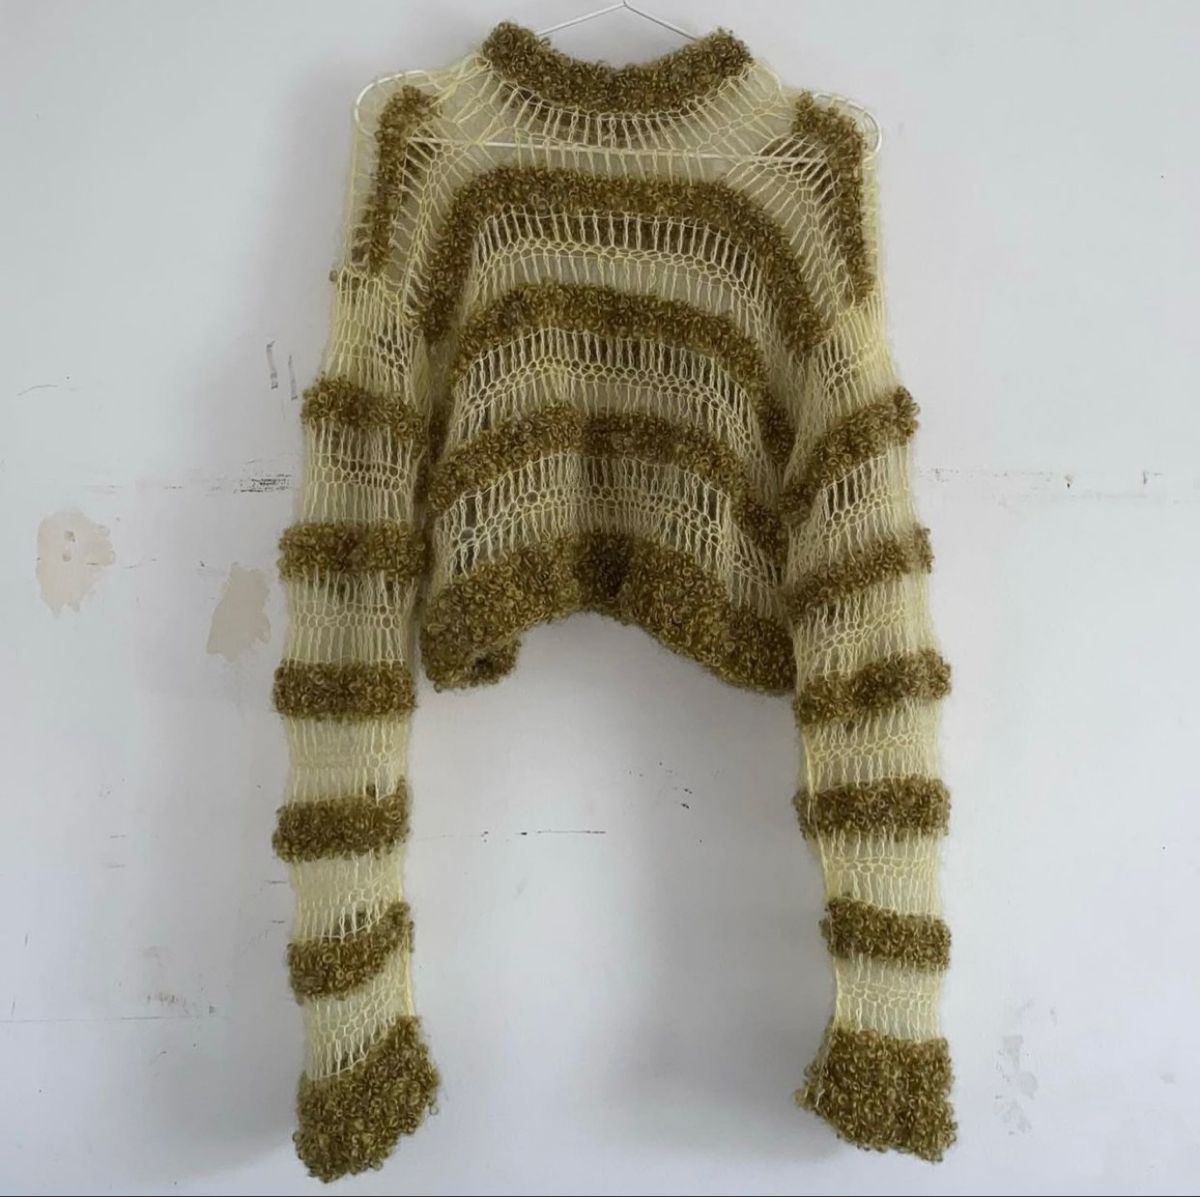 Silky Mohair Sweater for Men and Women